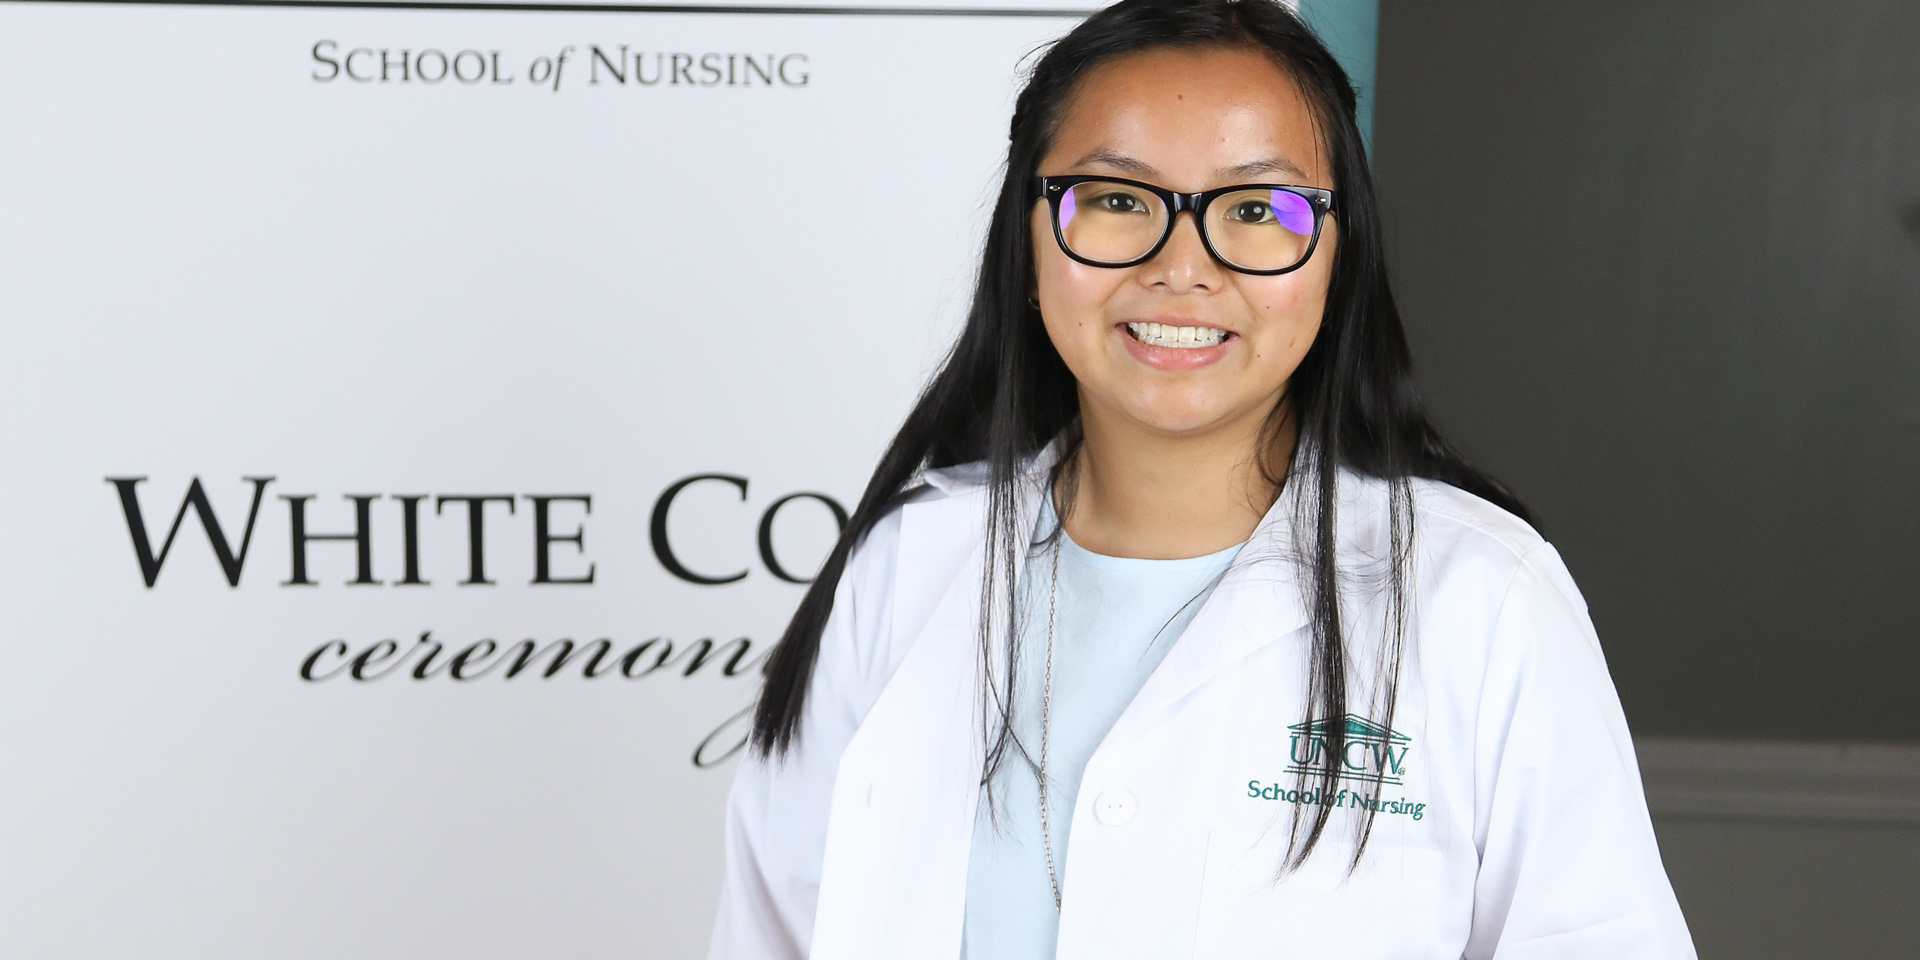 A nursing student stands in her white coat in front of the sign for the white coat ceremony.